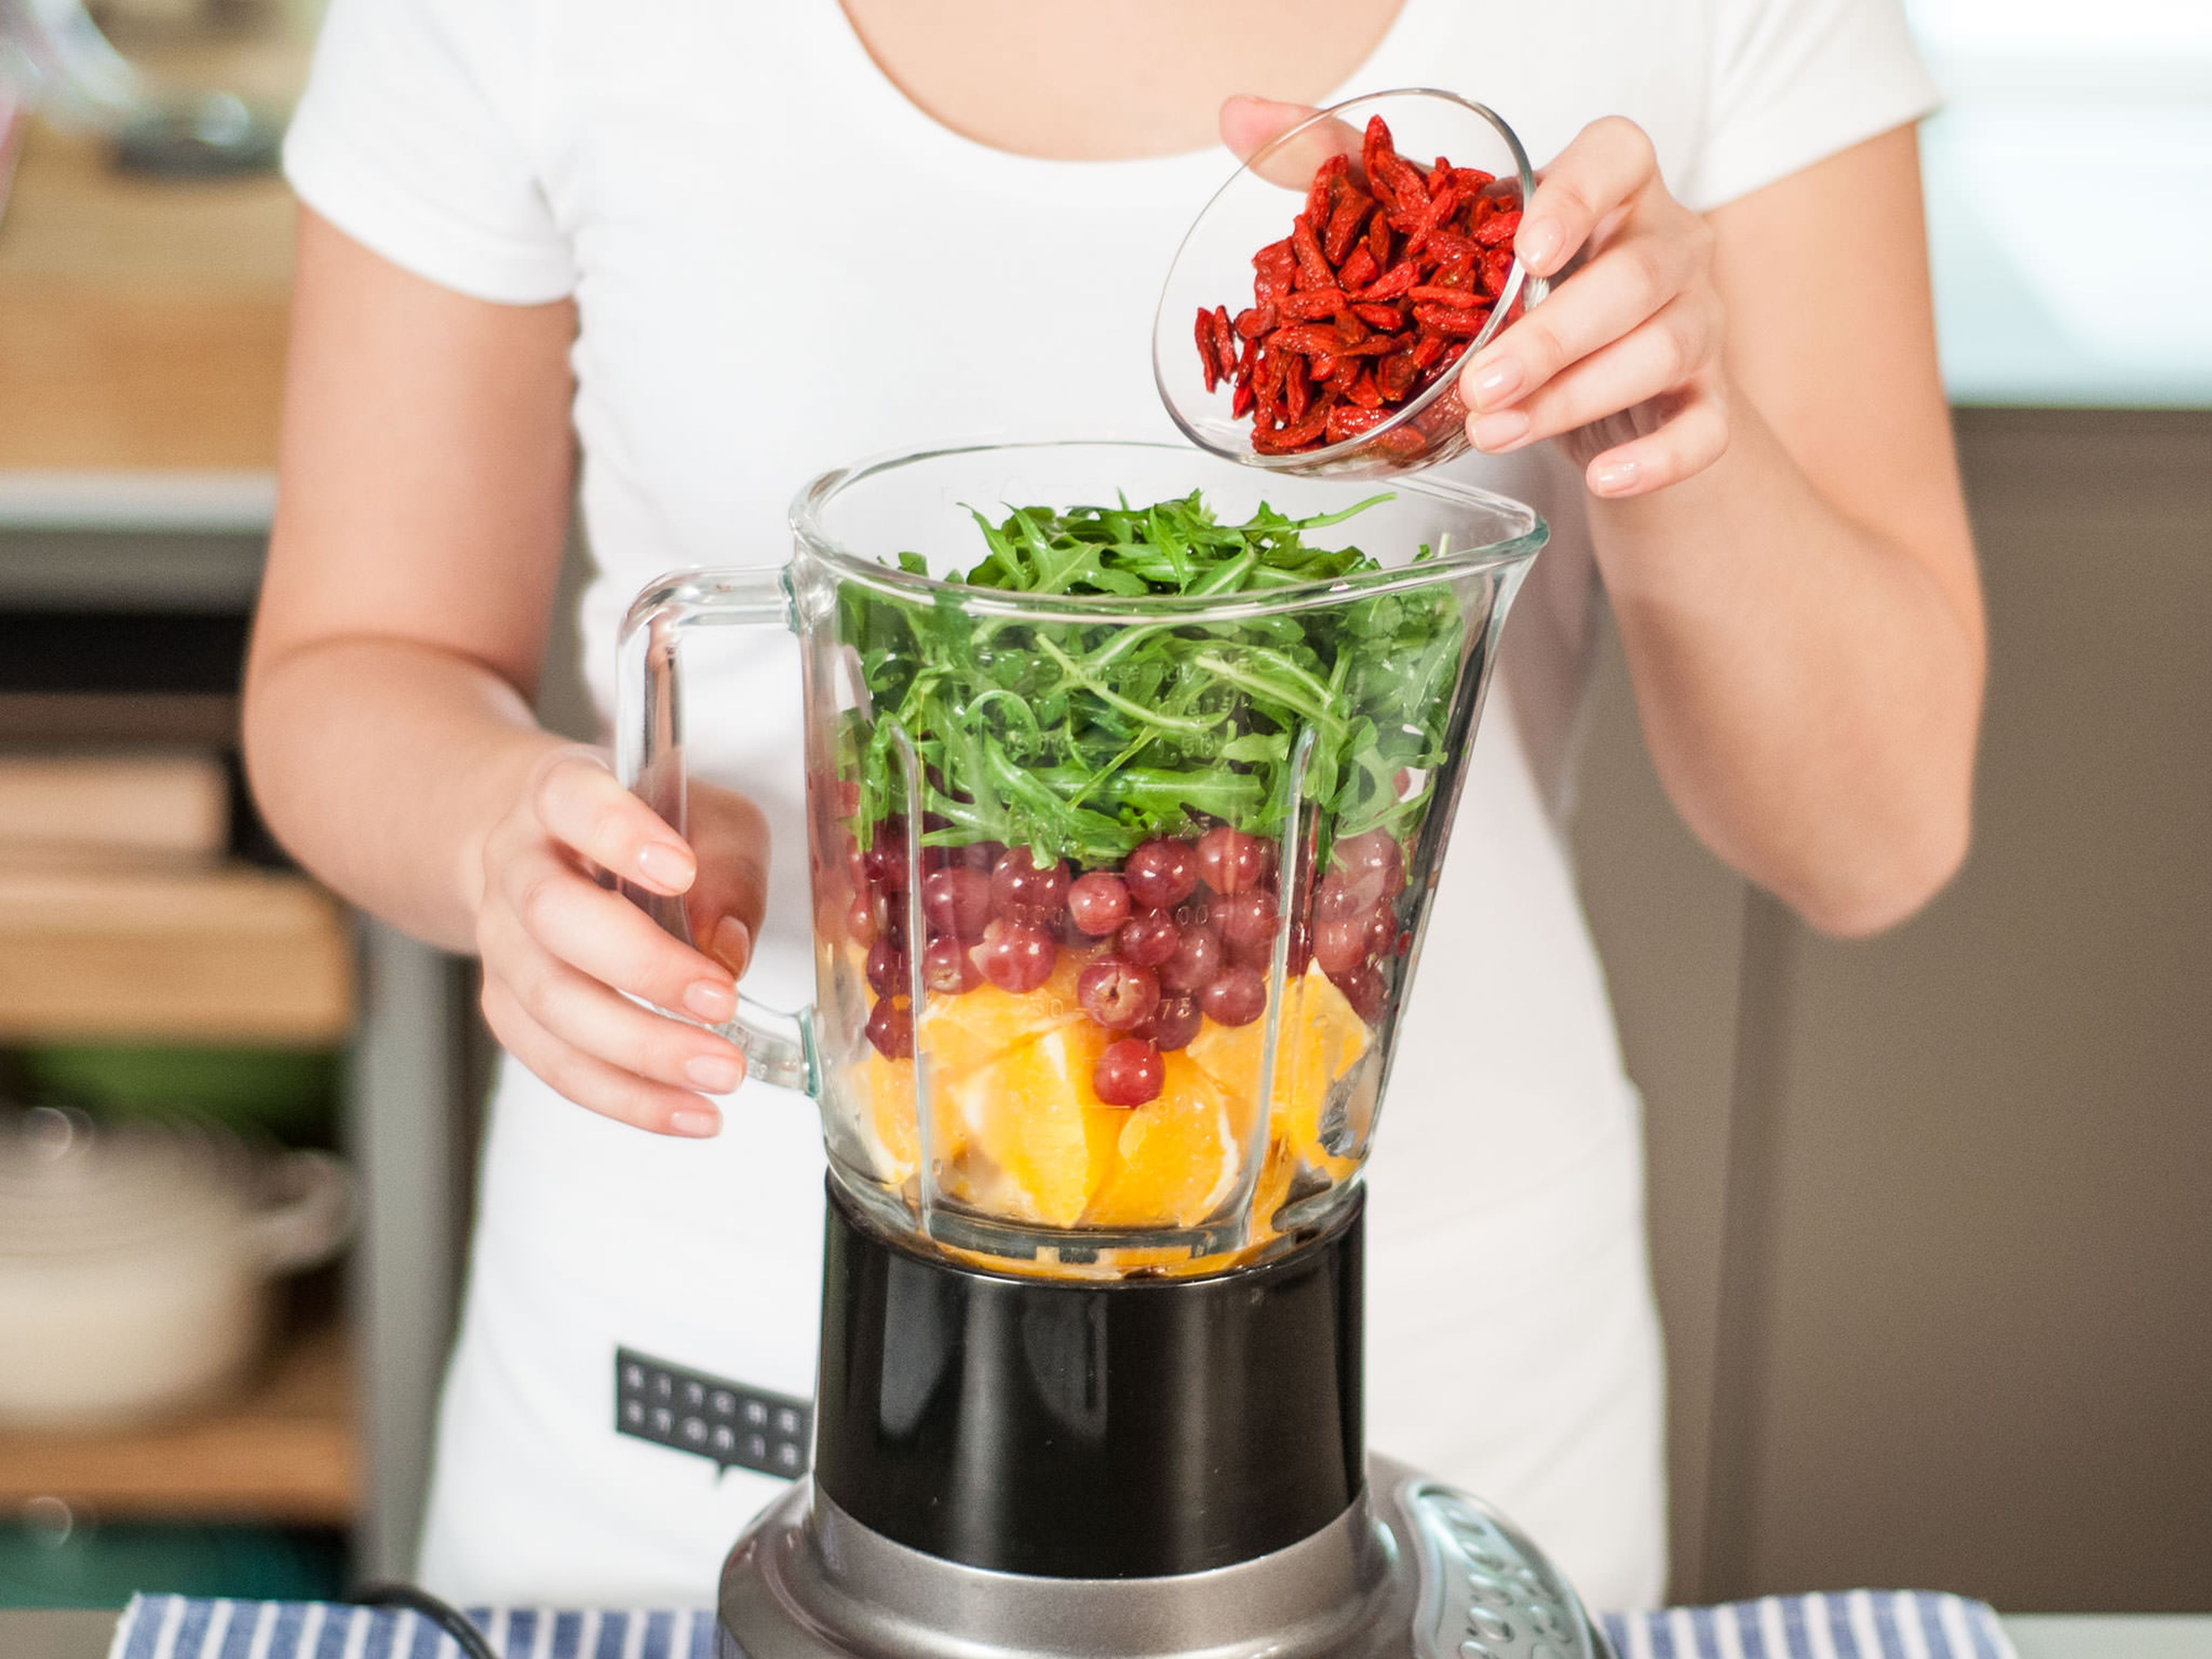 Add bananas, oranges, grapes, arugula, water, ice cubes, and berries to blender. Blend on high for approx. 1 - 2 min. until well mixed. Add some honey for more sweetness, if desired. Enjoy as a snack or for breakfast!